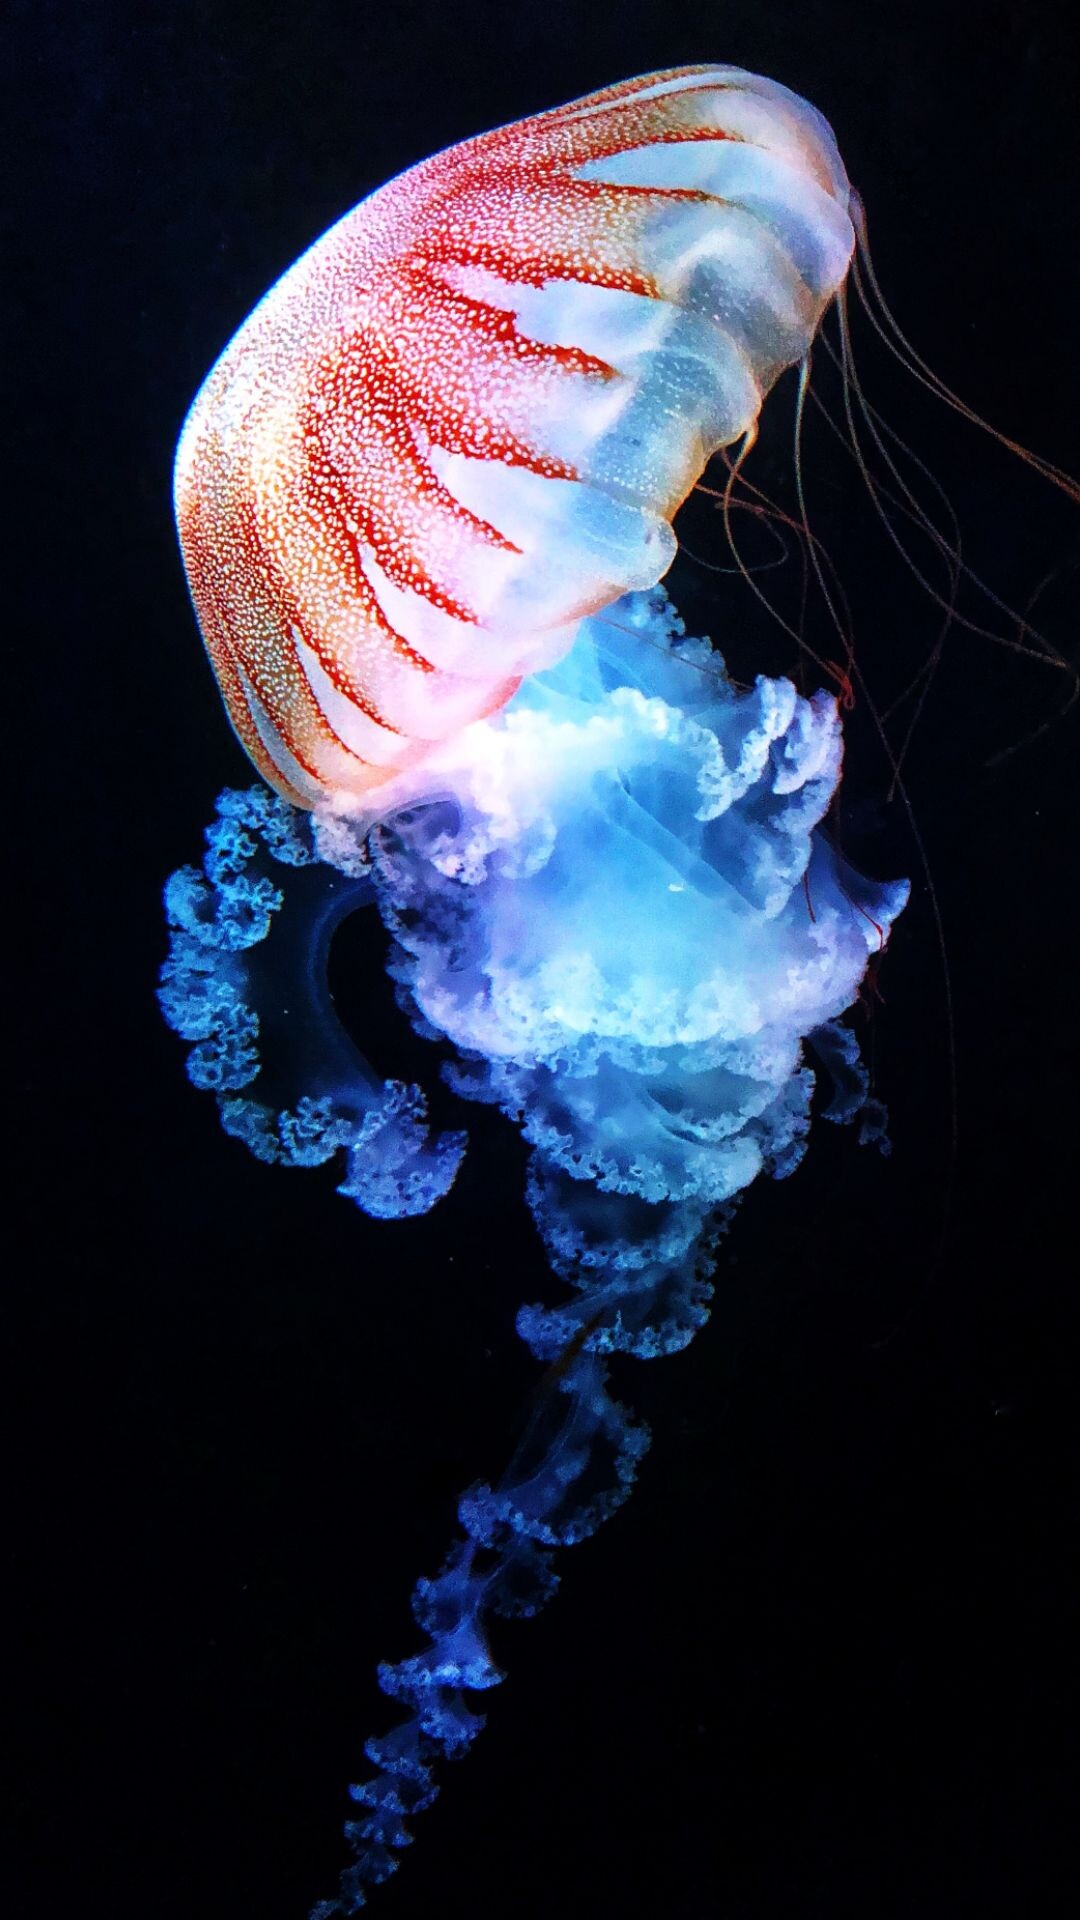 Glowing Jellyfish: Aequorea jelly, The most marvelous creatures of earth, Extensible marginal tentacles studded with stinging cells. 1080x1920 Full HD Wallpaper.